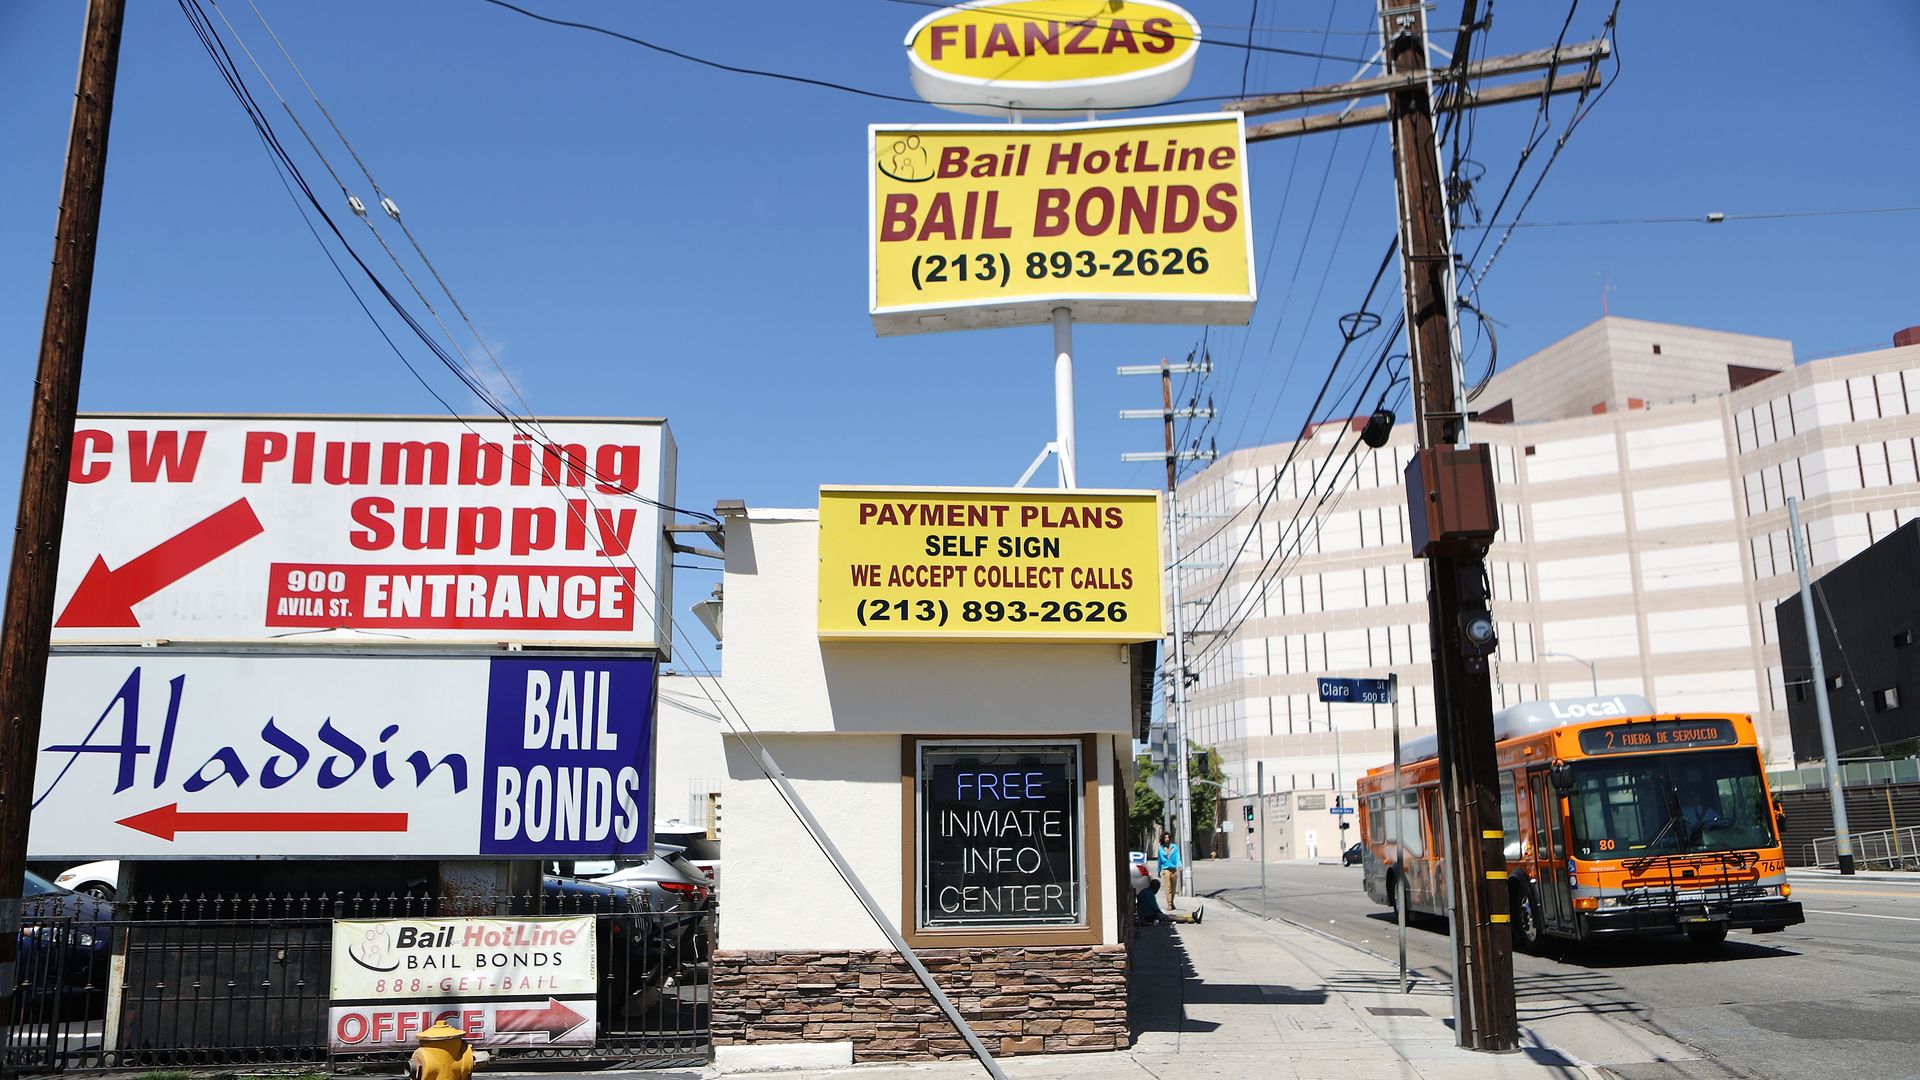 A small building with various signs and billboards advertising bail bond payment plans and services